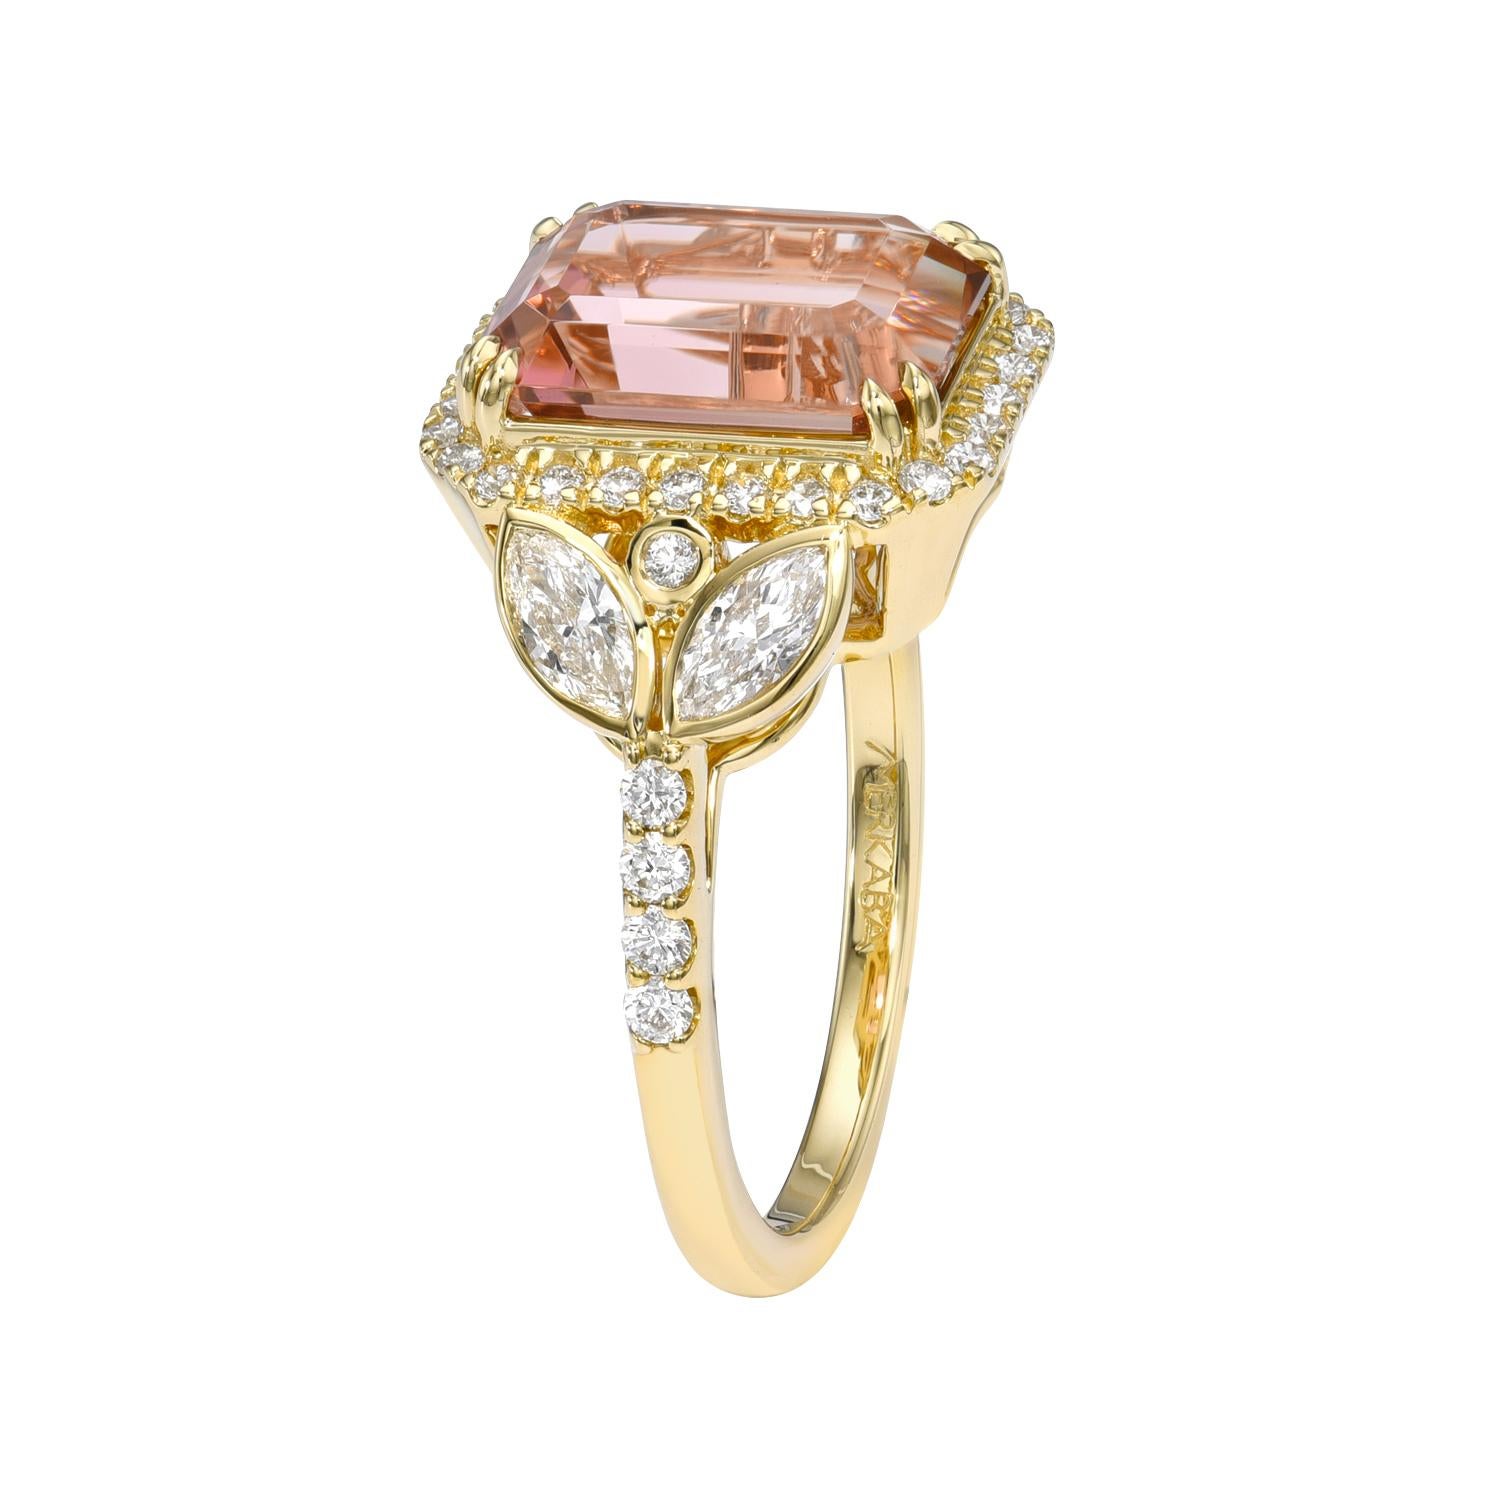 Fine 4.68 carat Pink Tourmaline Emerald Cut, 18K yellow gold ring, decorated with a total of 0.52 carat collection Marquise diamonds, and 0.38 carat round brilliant diamonds.
Ring size 6.5. Resizing is complementary upon request.
Returns are